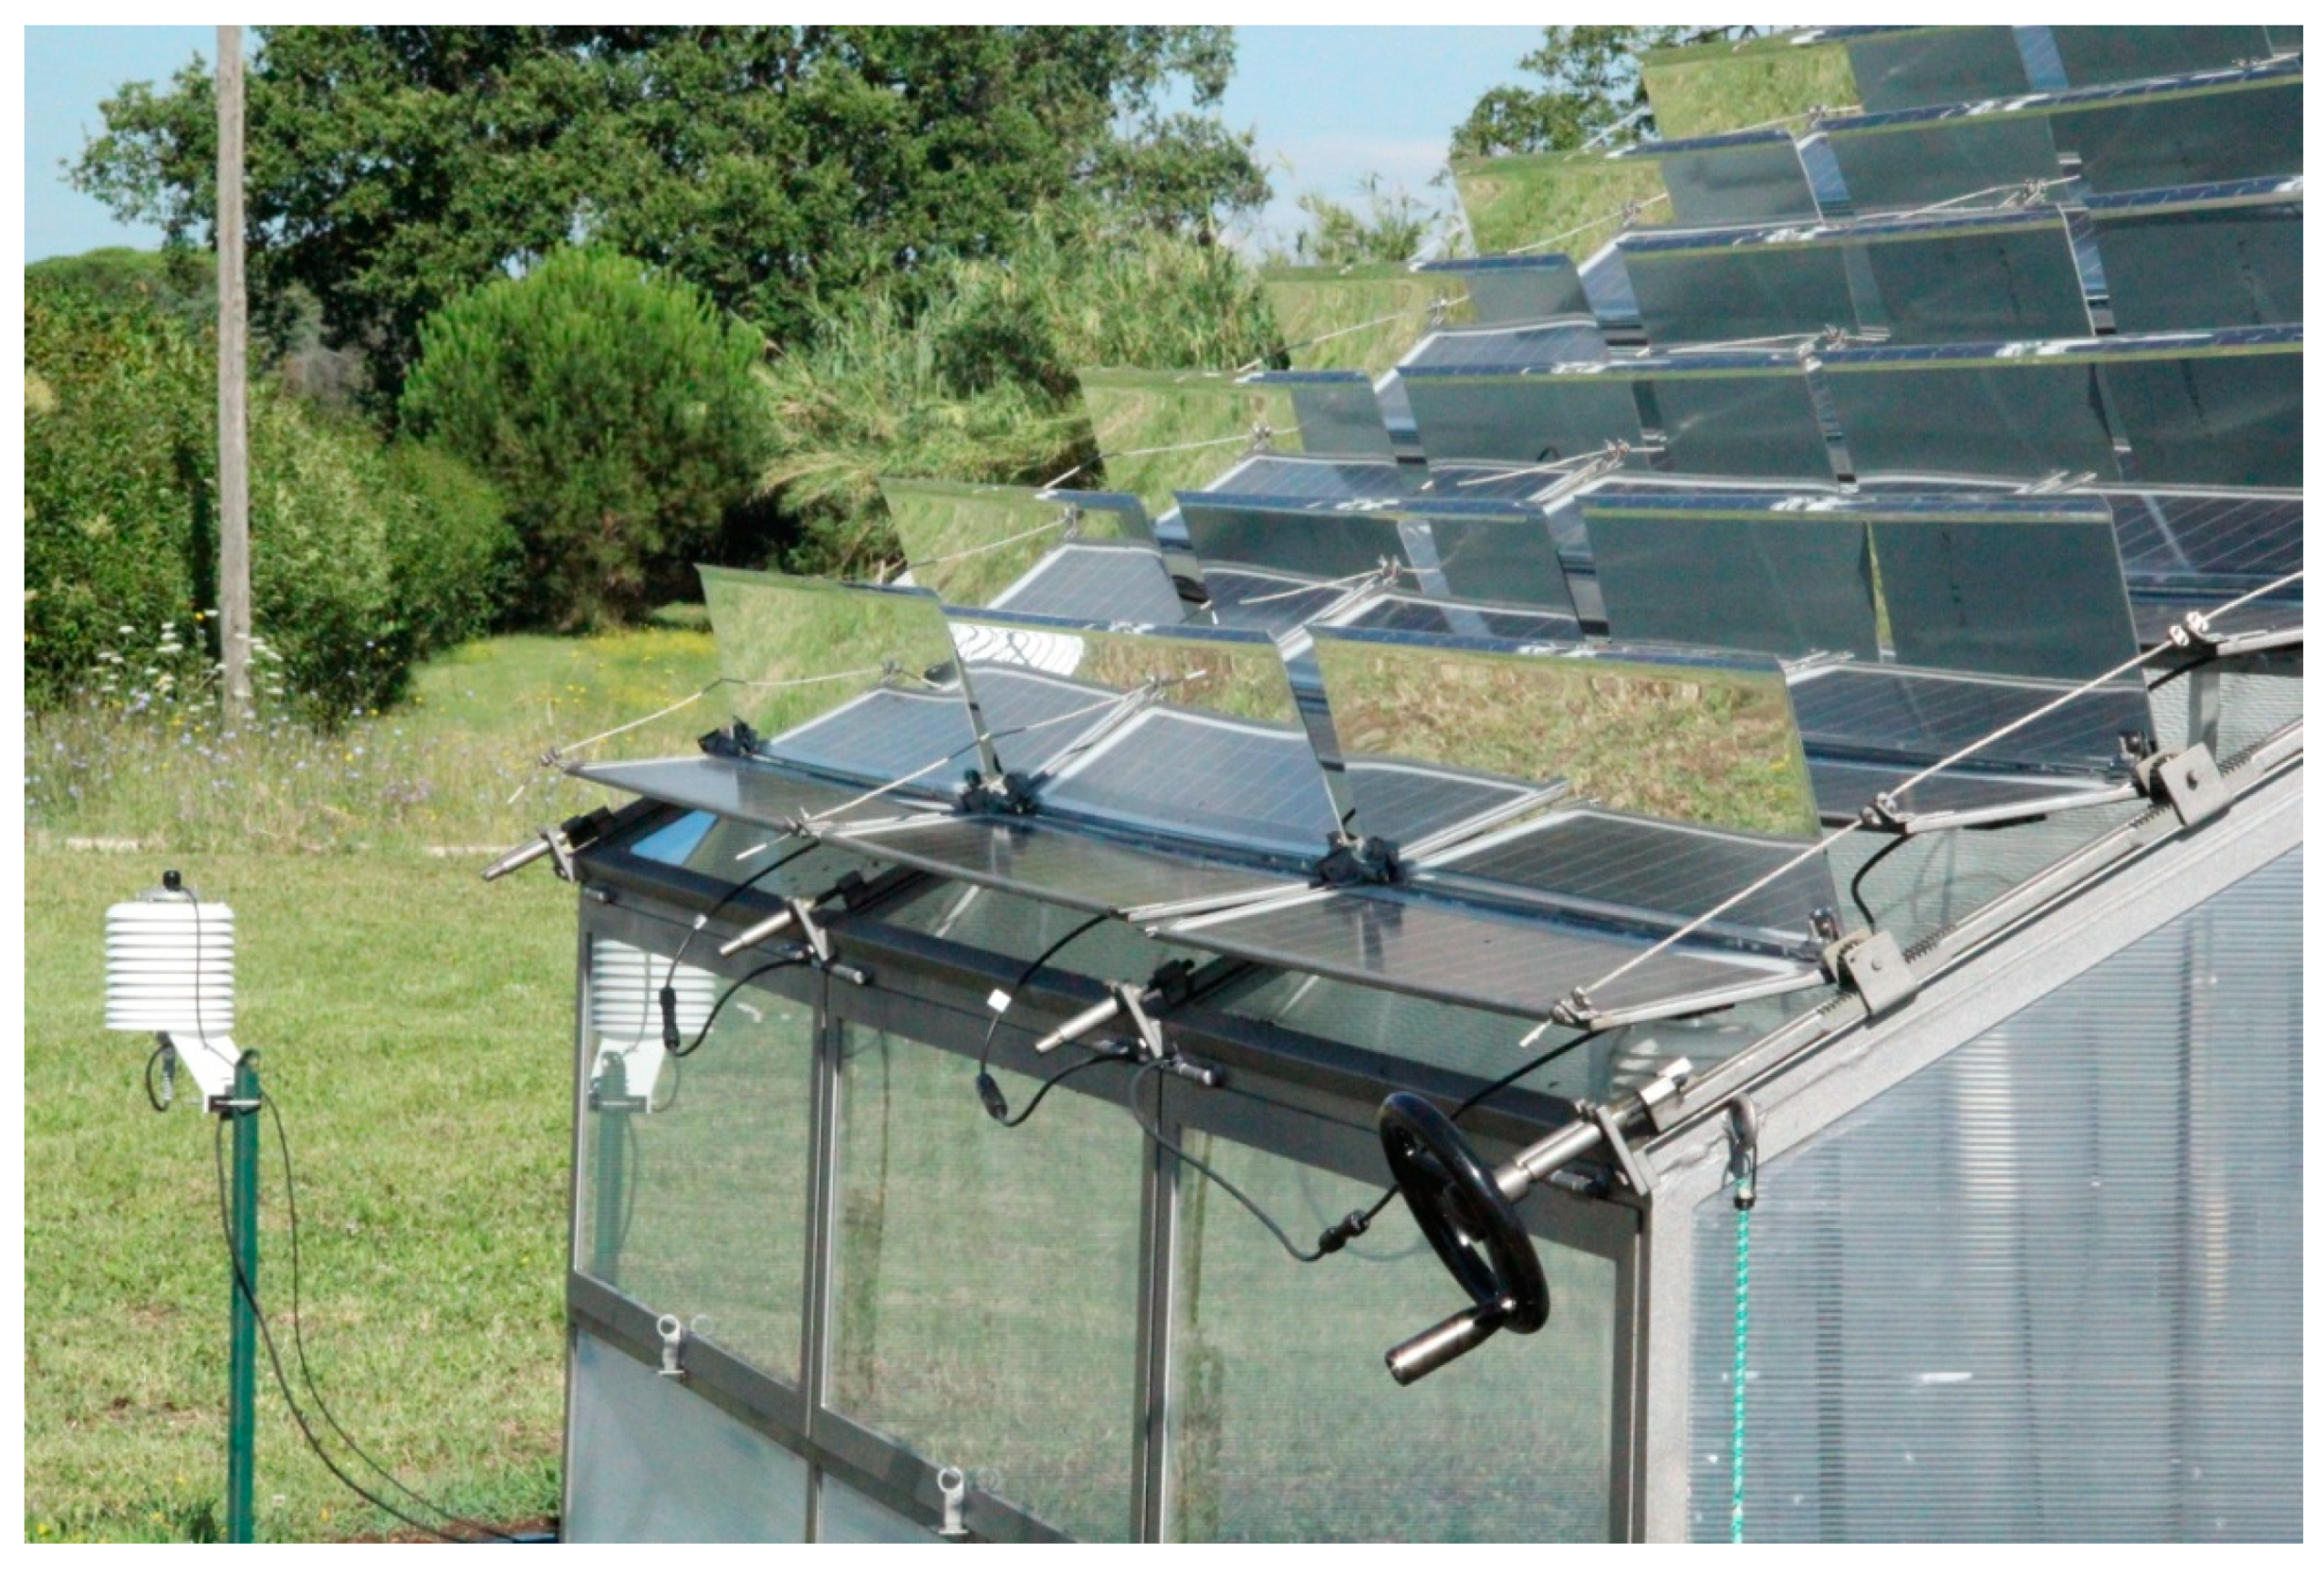 Energies | Free Full-Text | A Photovoltaic Greenhouse with Passive ...